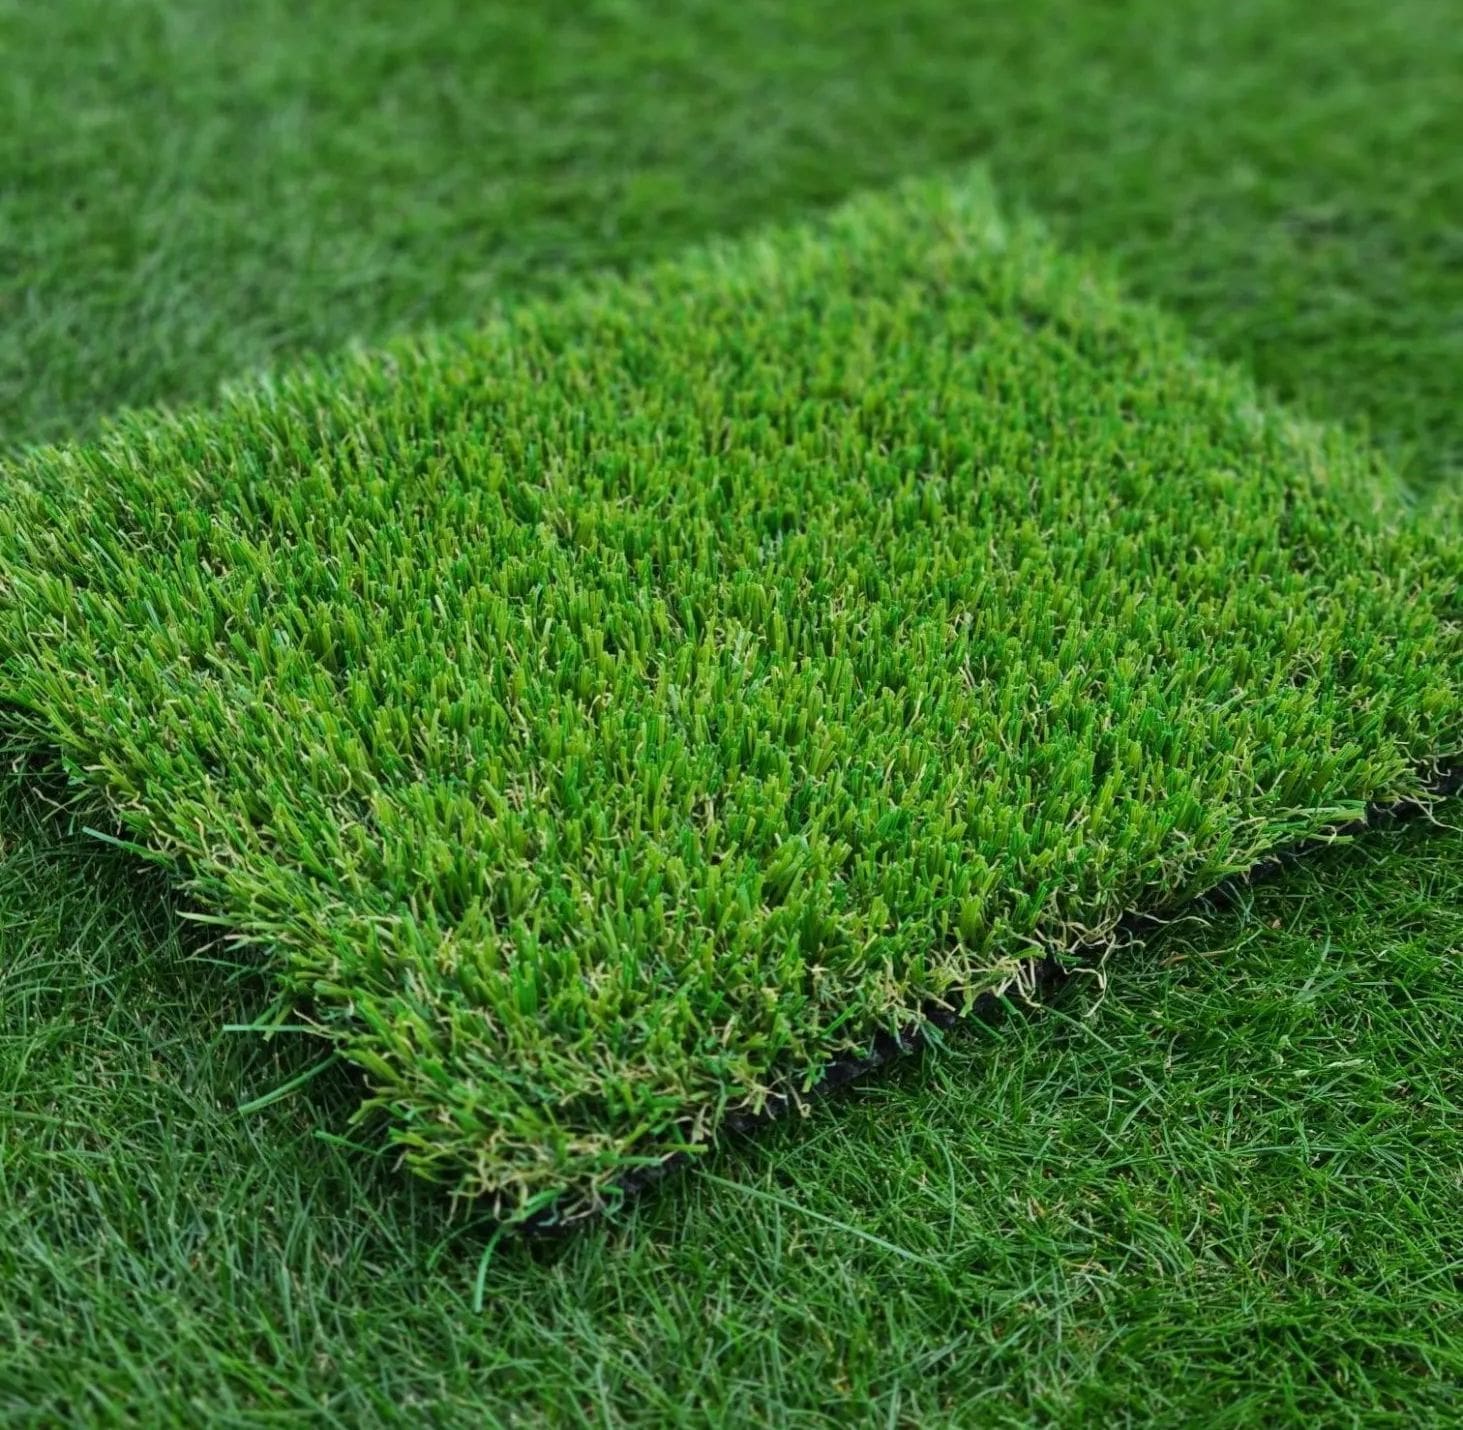 Windsor artificial grass collection - fake grass - astro turf - Readylawn nz